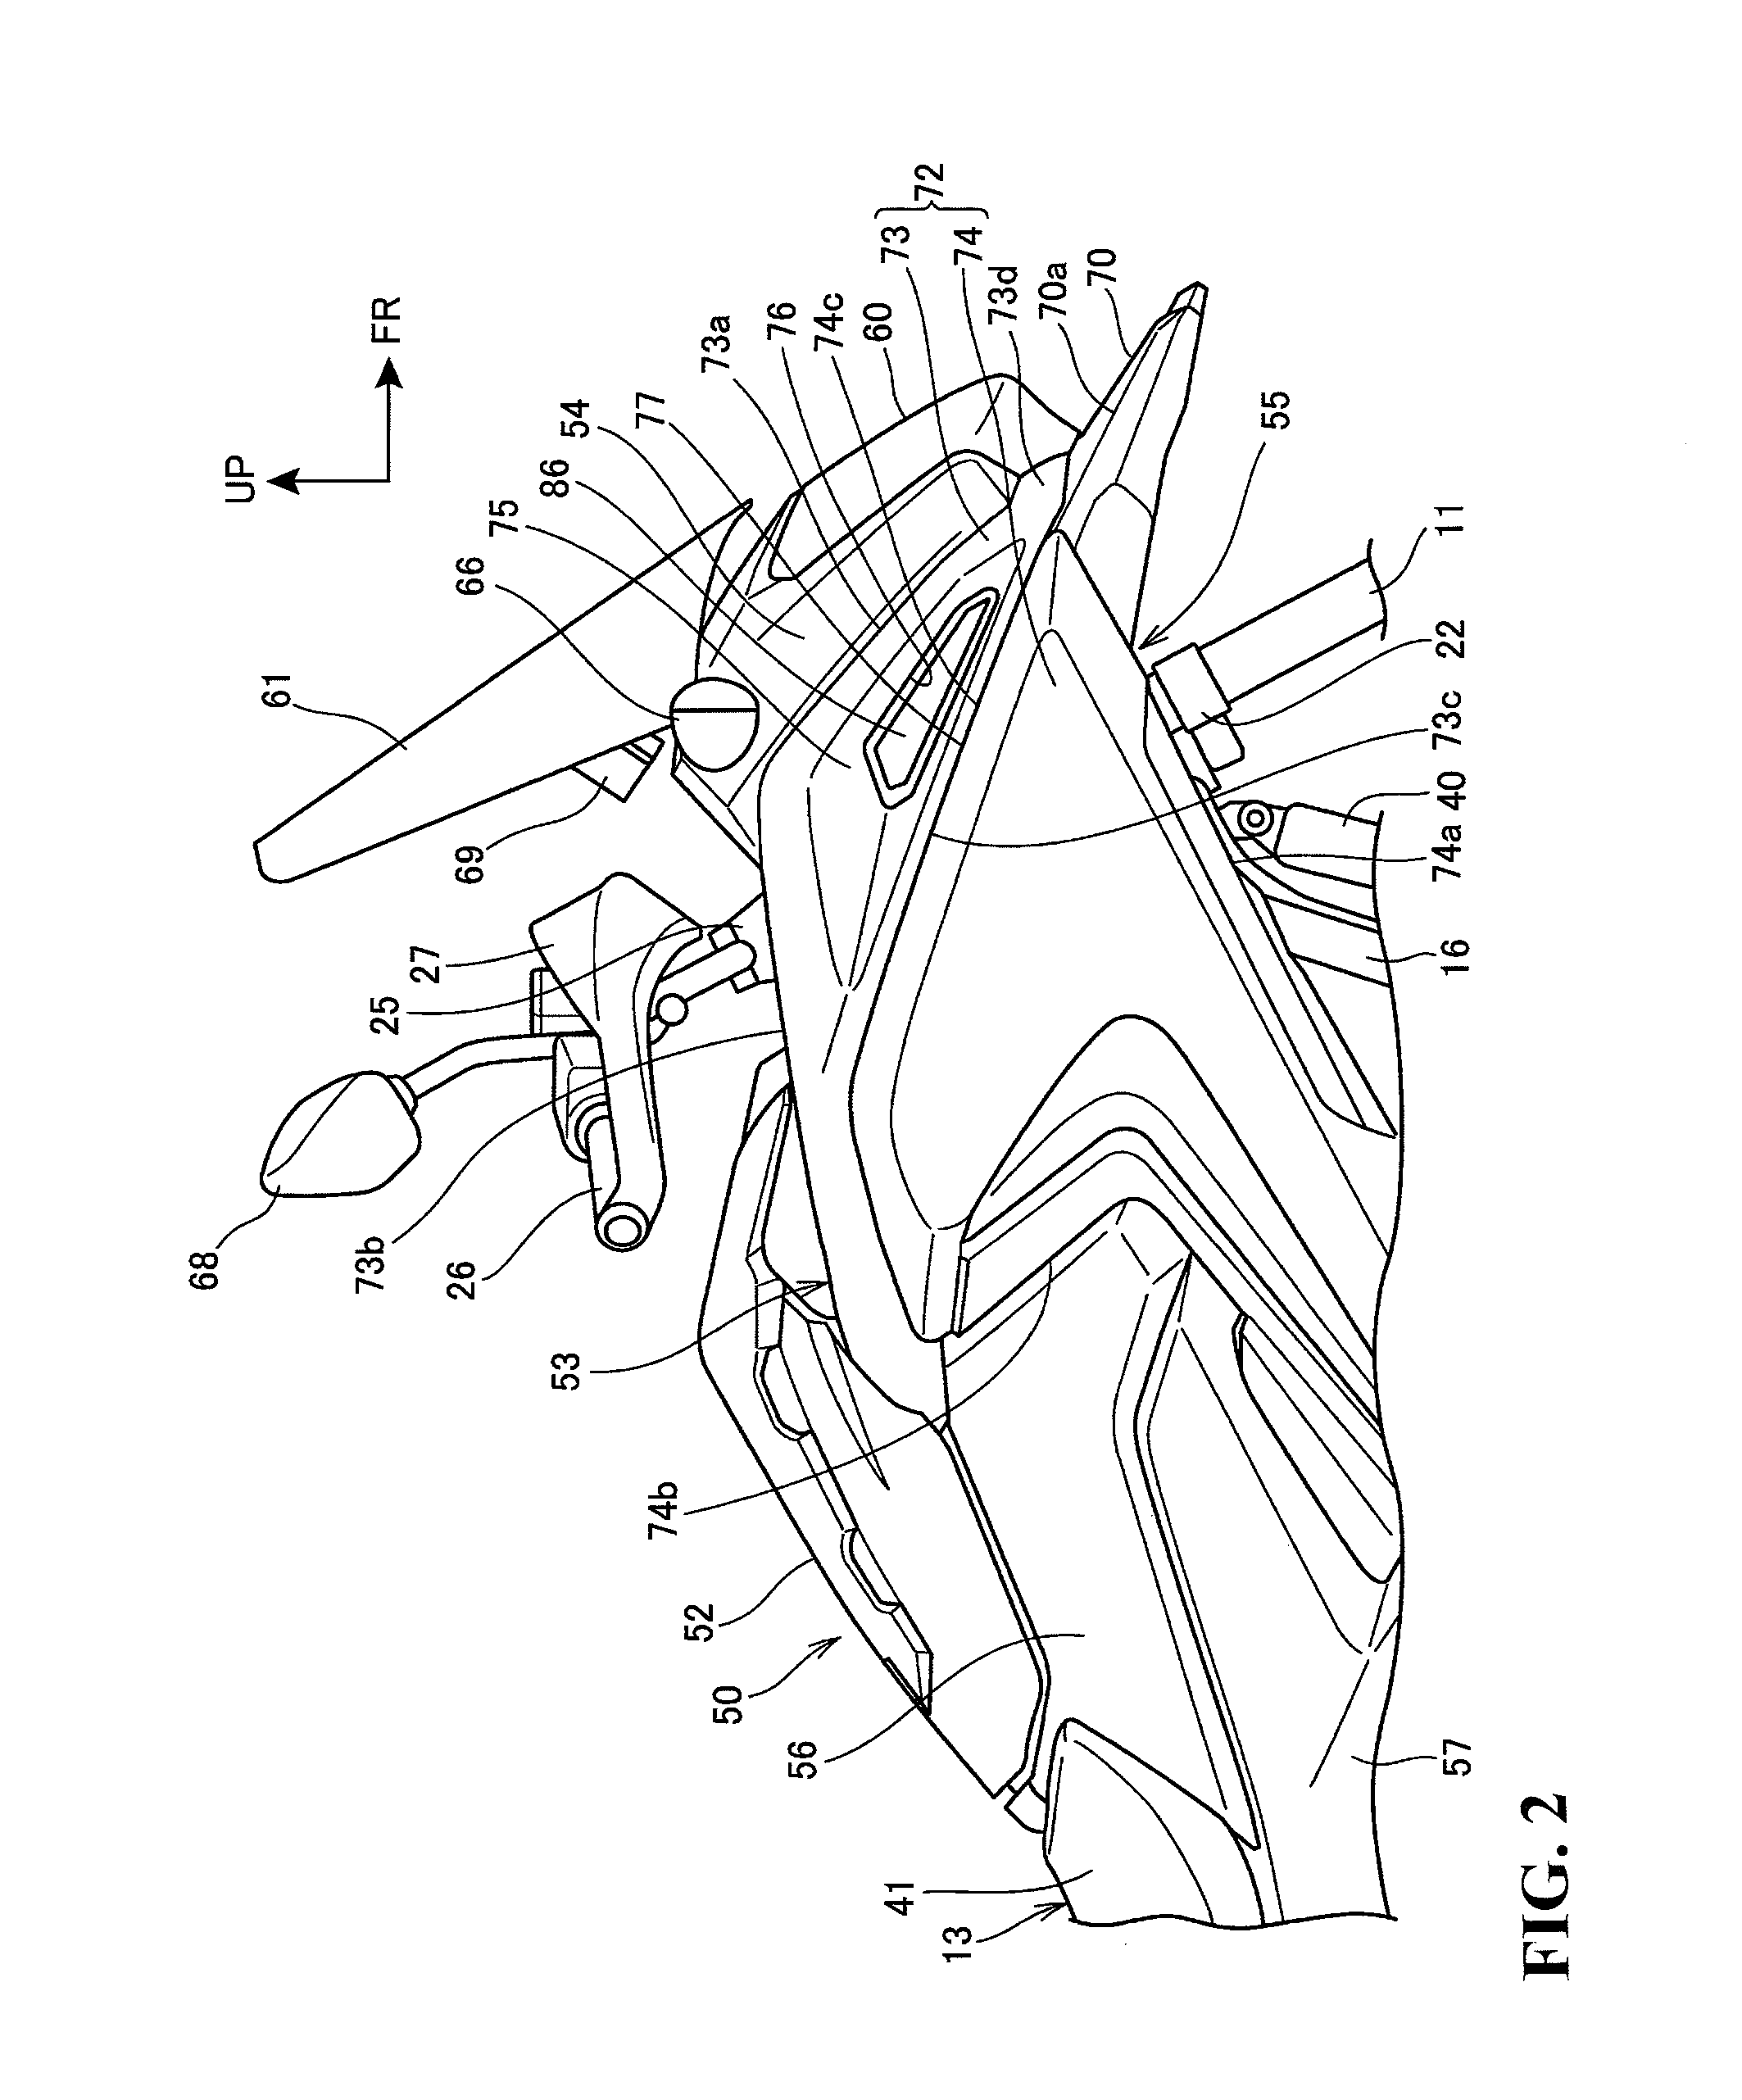 Side cover structure of saddle-ride-type vehicle